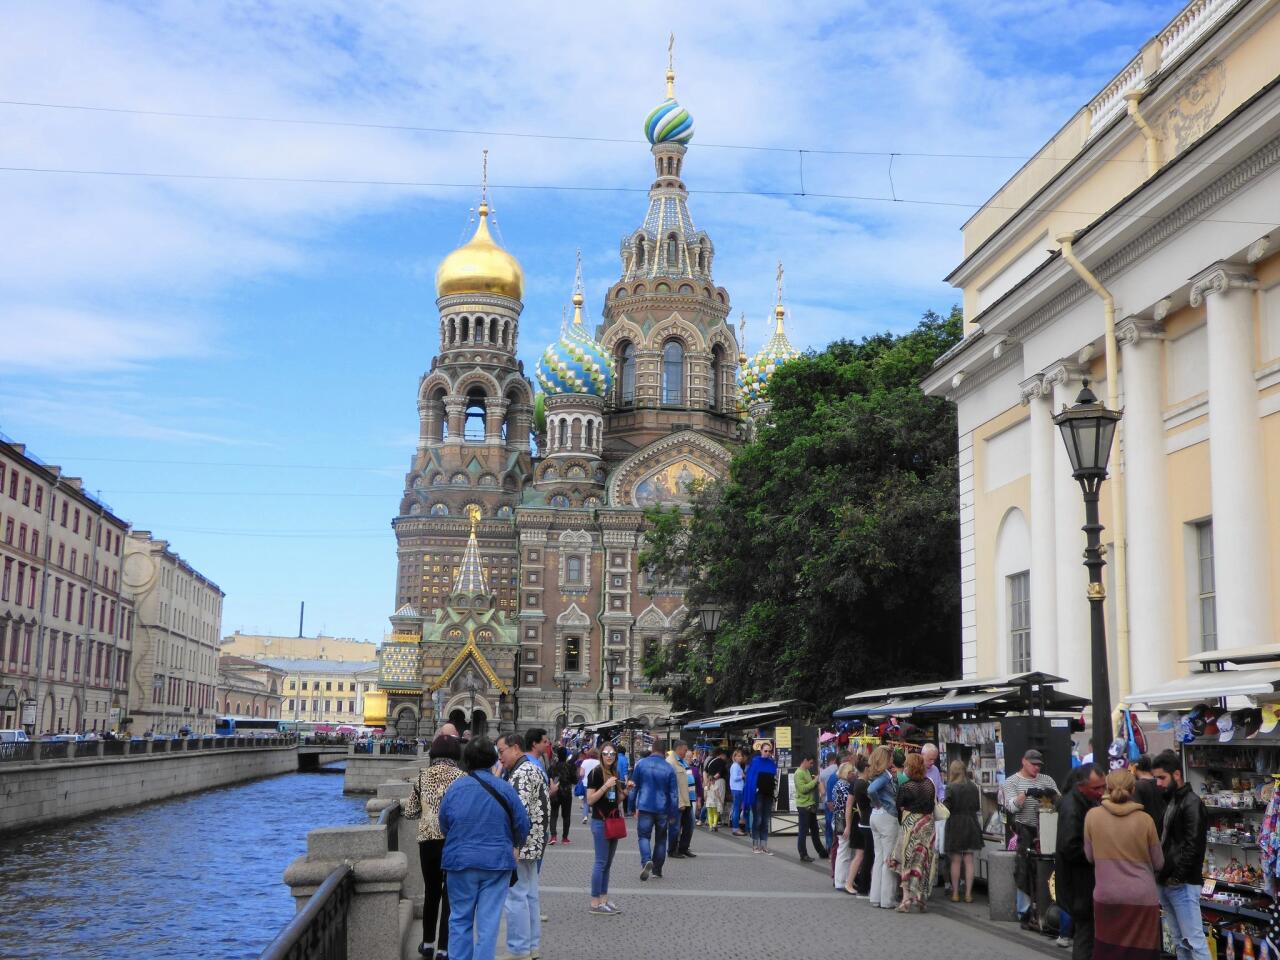 Waterways crisscross St. Petersburg, a Western European-feeling city that's also home to the Church of Our Savior on Spilled Blood.